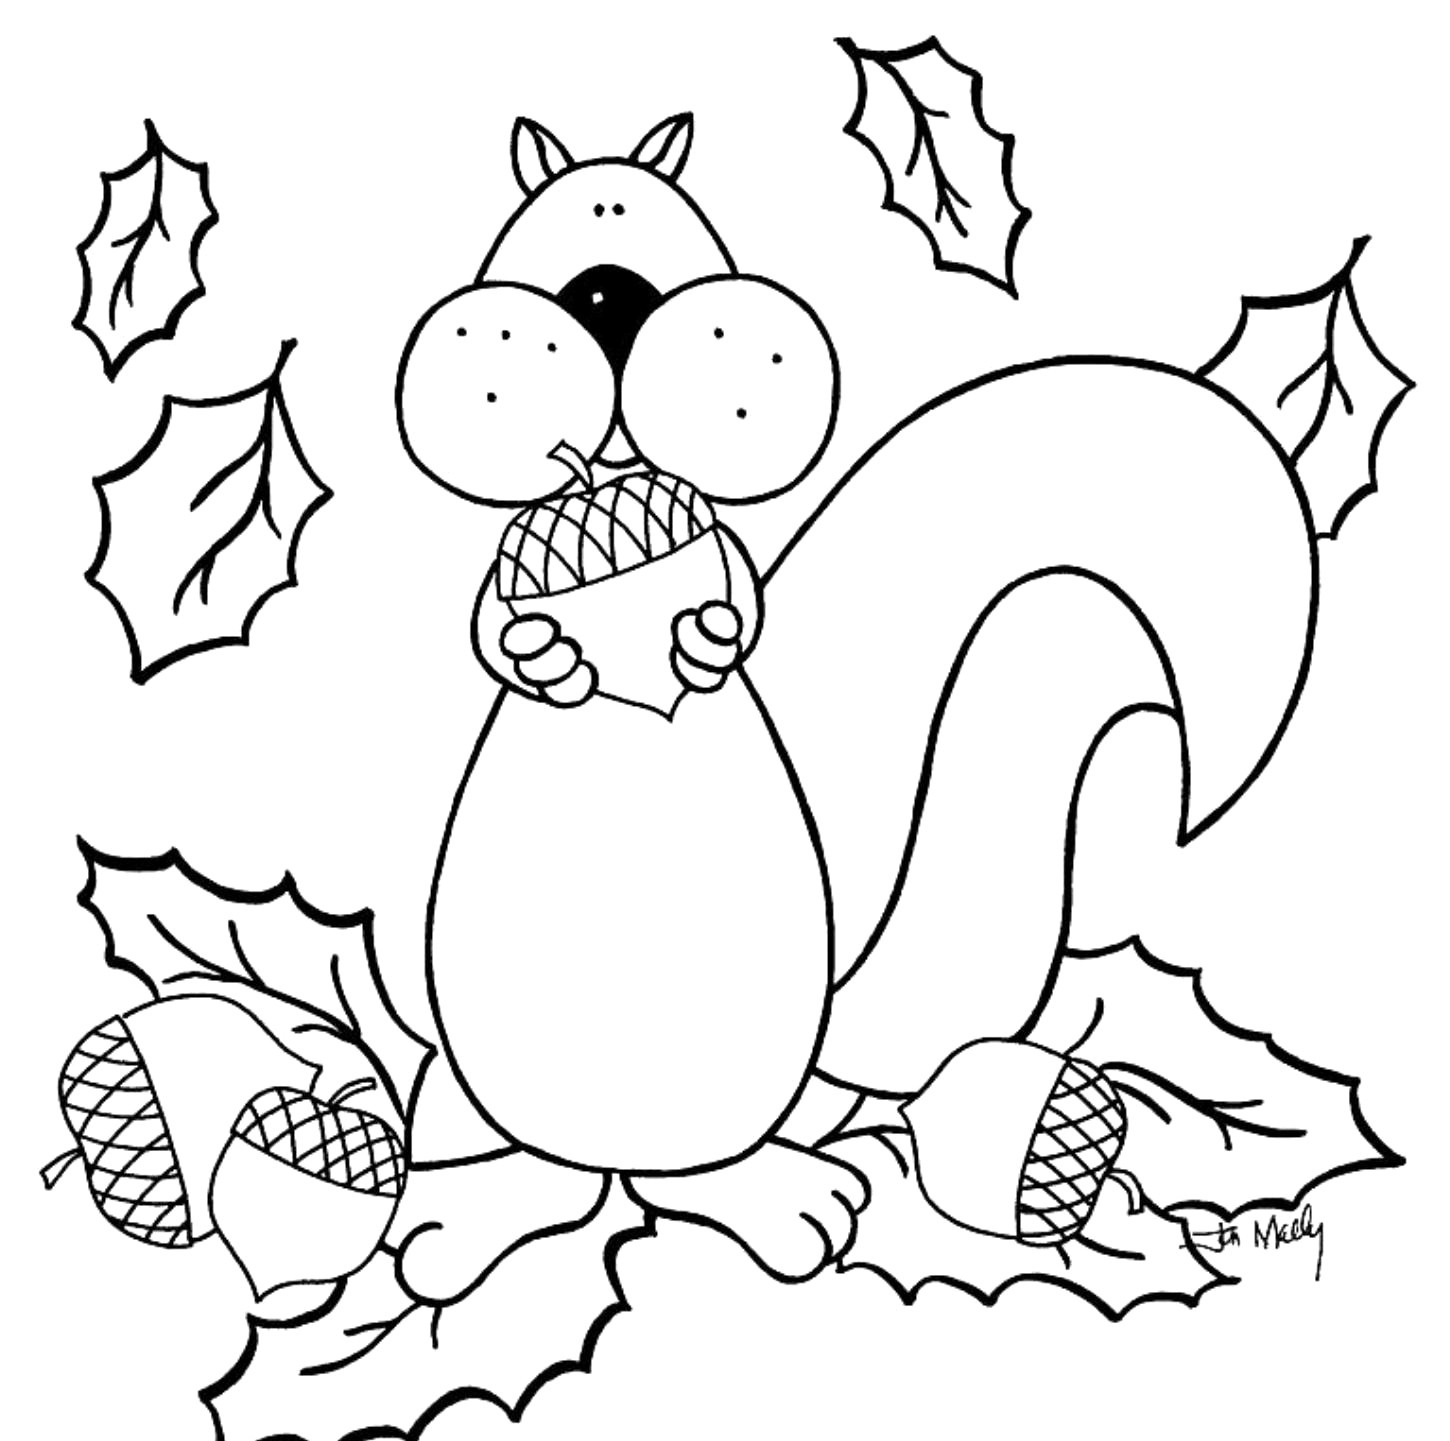 Free Printable Fall Coloring Pages For Kids - Best Coloring Pages - Free Printable Fall Coloring Pages For Adults